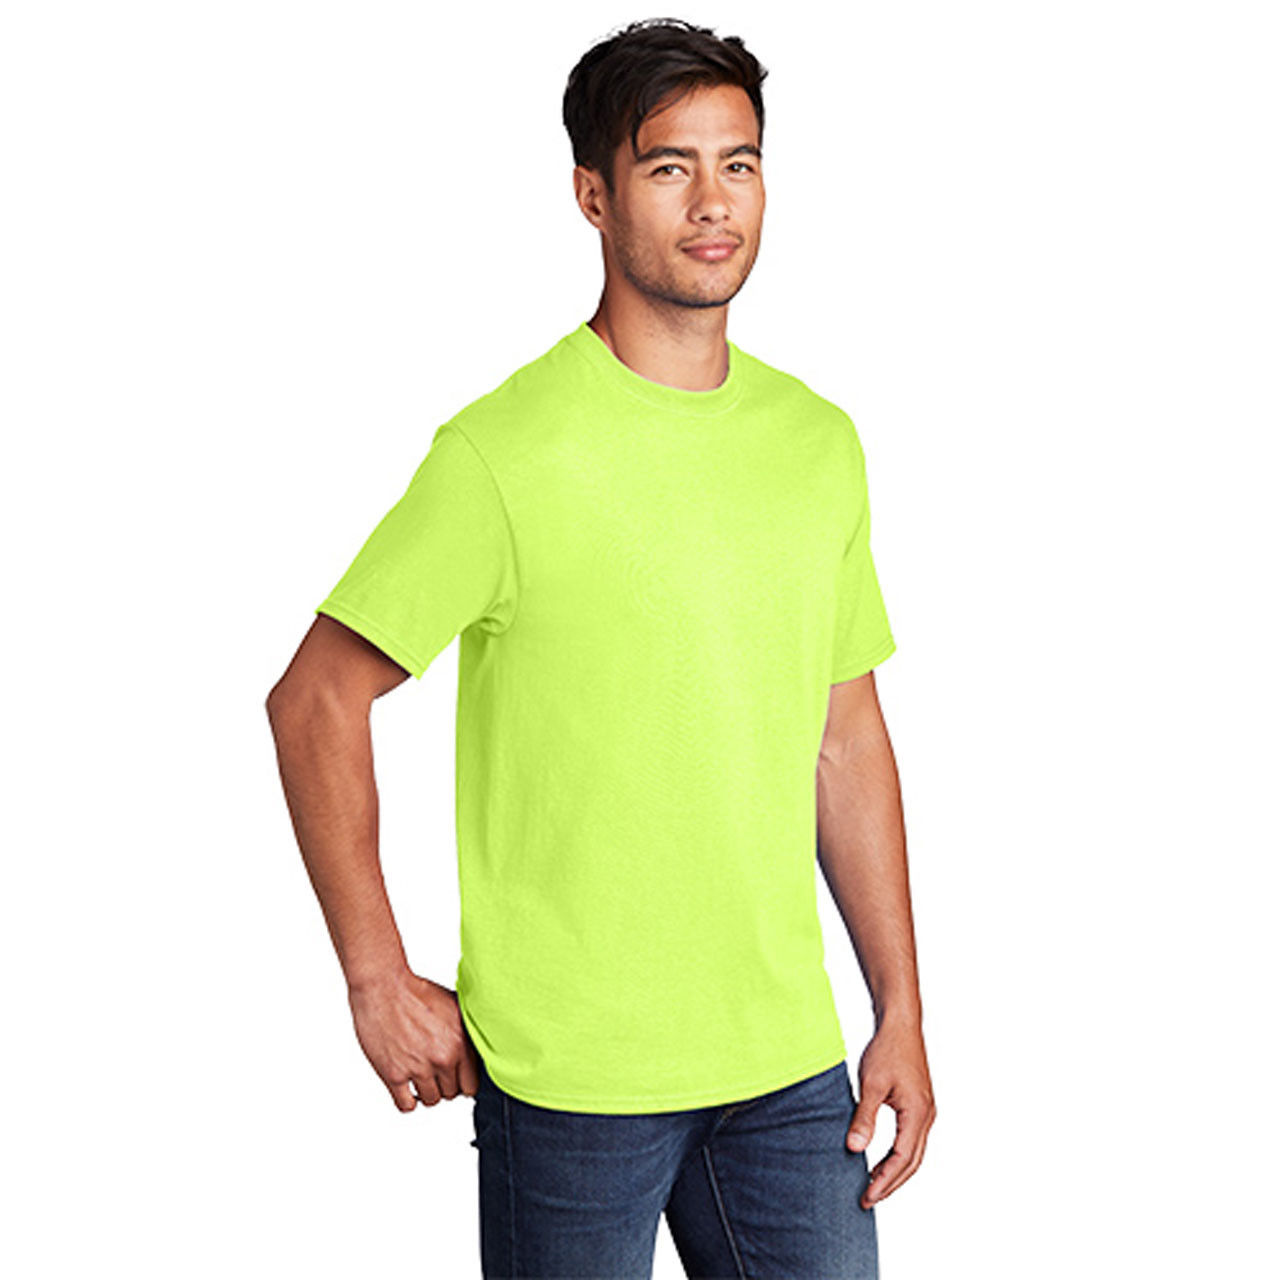 Who are these bulk neon shirts suitable for?